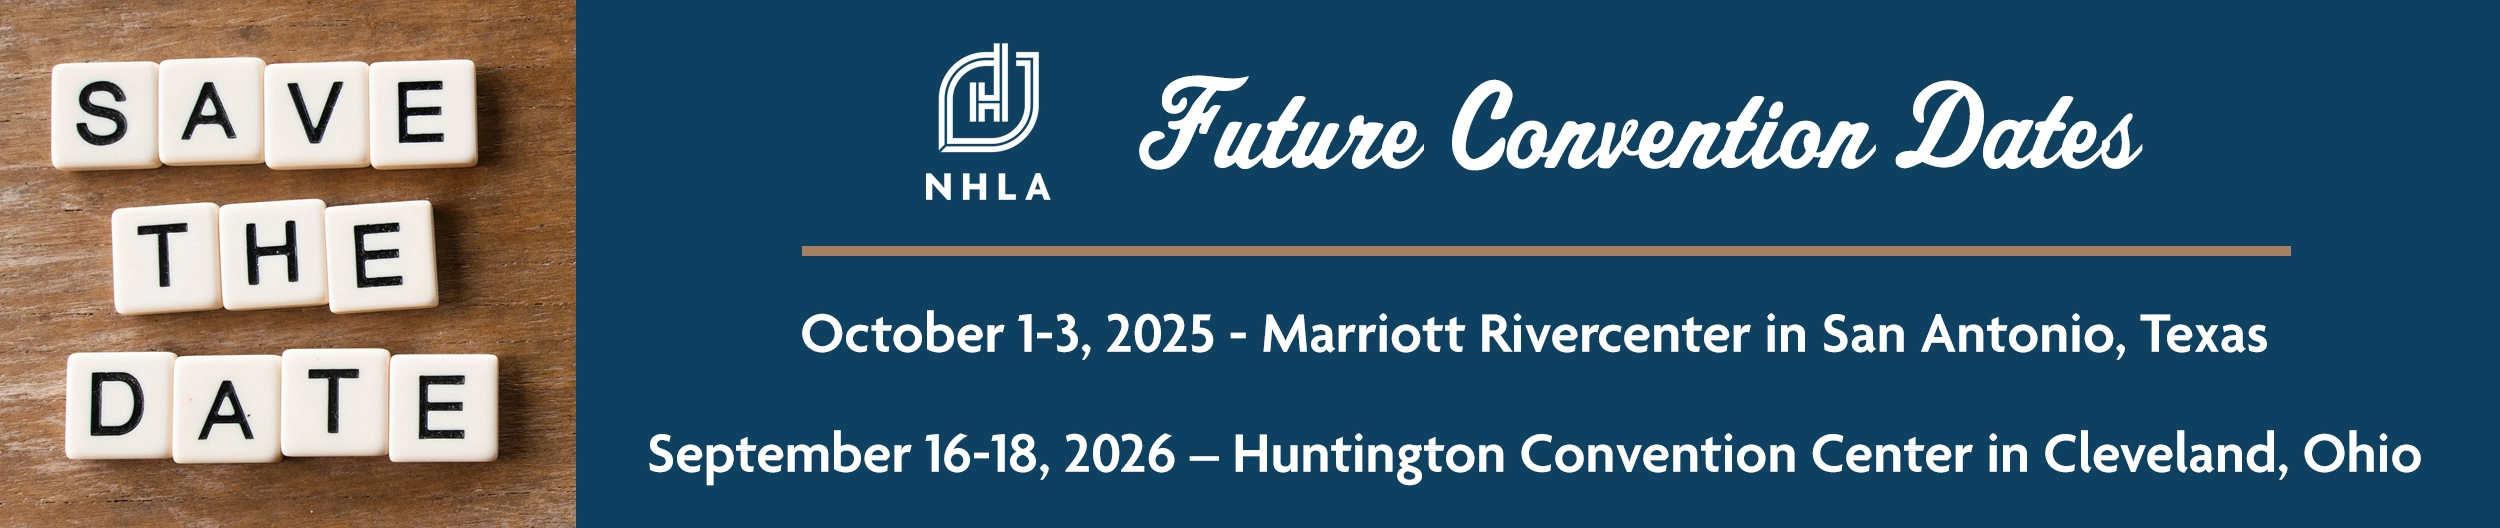 Save the Dates for upcoming NHLA Convention & Exhibit Showcases. NHLA Convention 2025 and NHLA Convention 2026 dates and locations